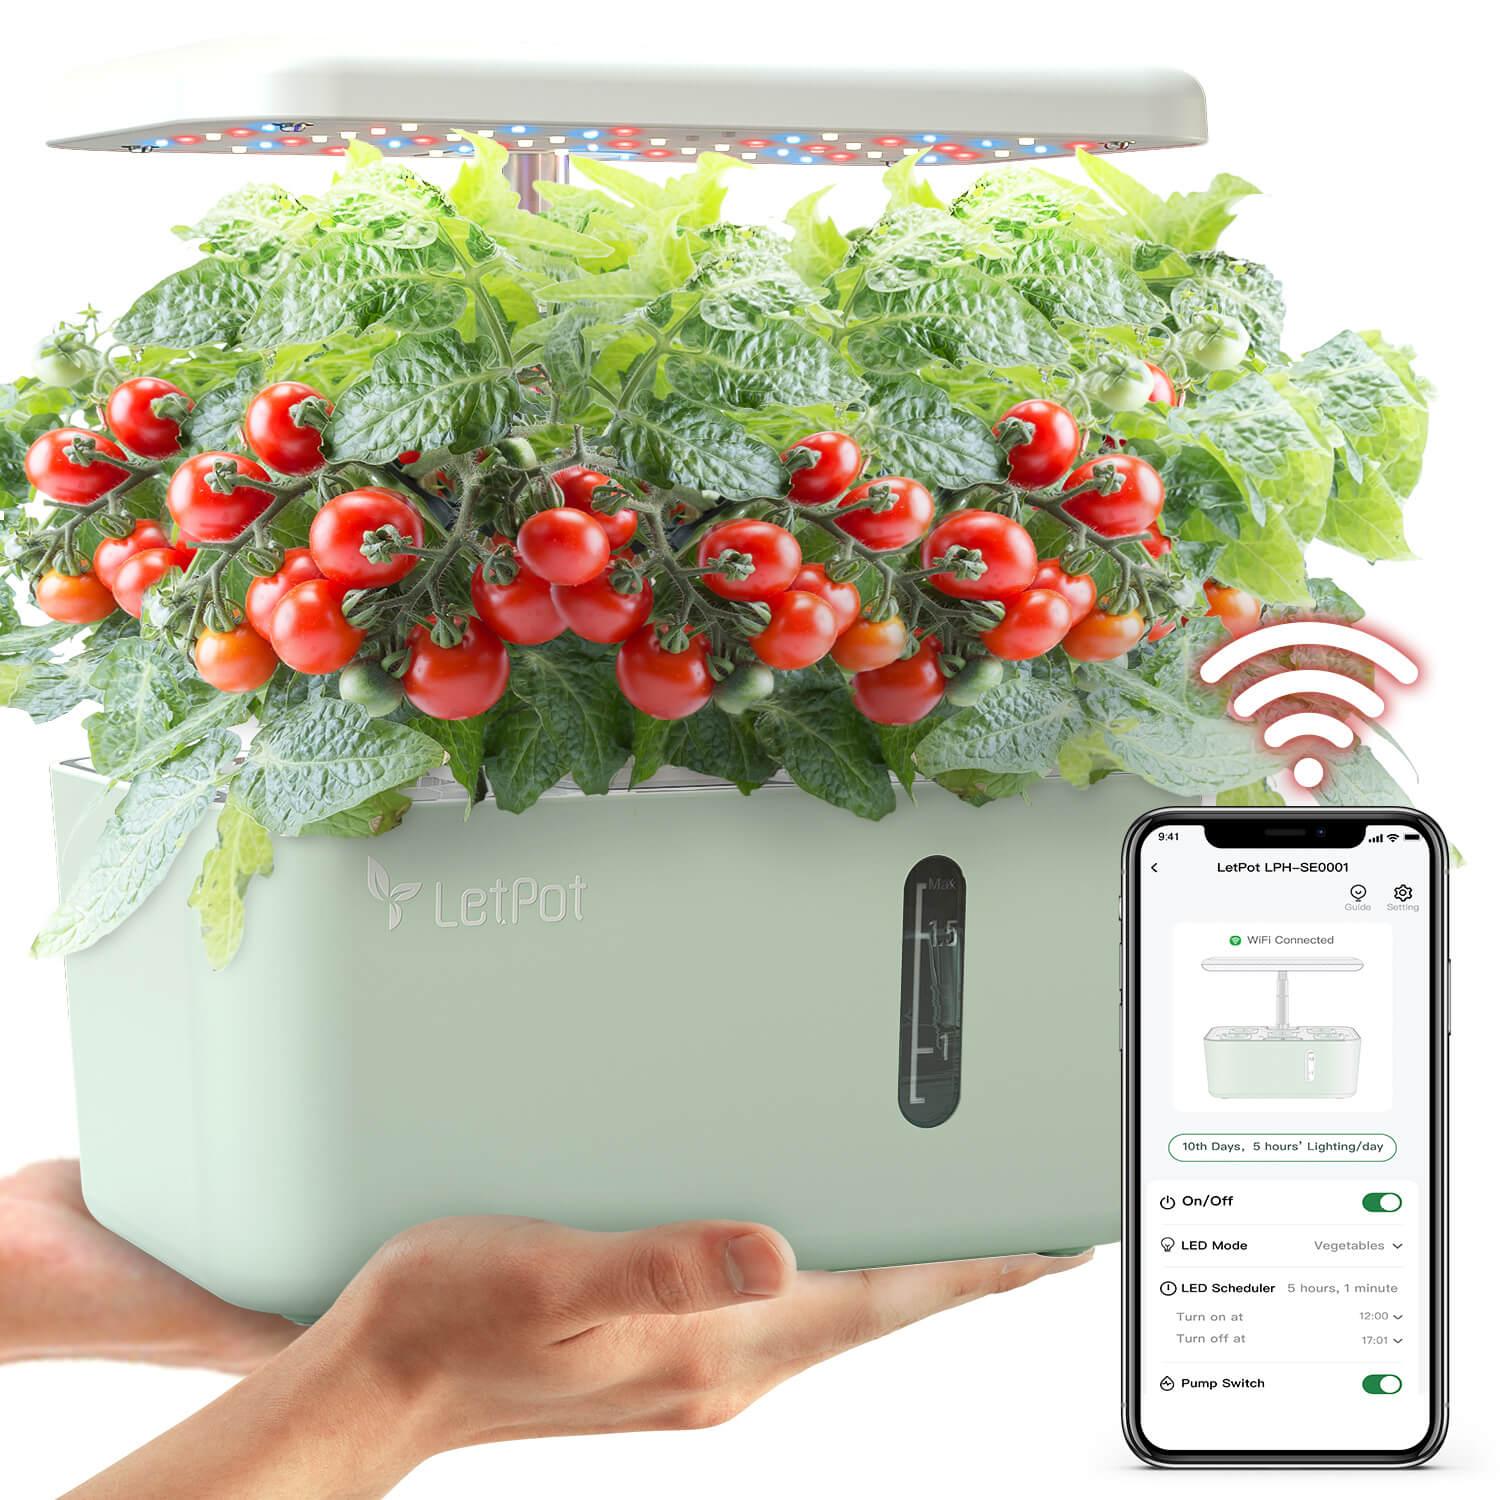 LetPot small hydroponic system